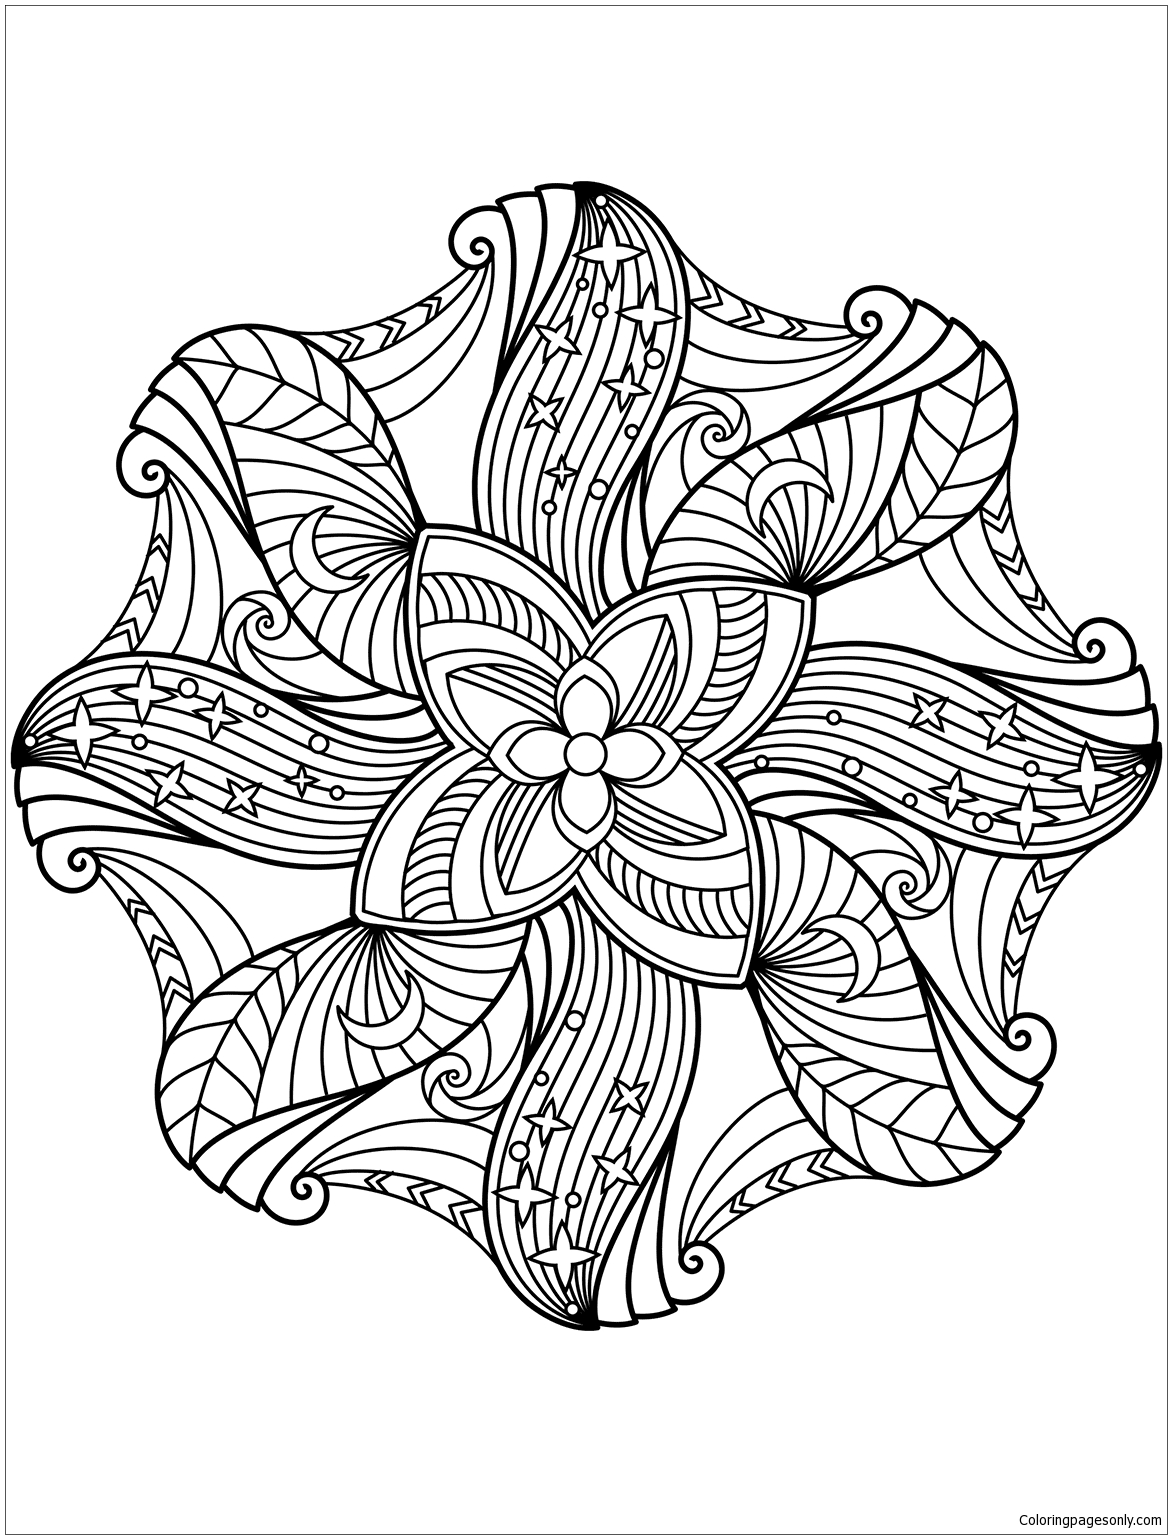 Flower Mandala 1 Coloring Page   Free Coloring Pages Online